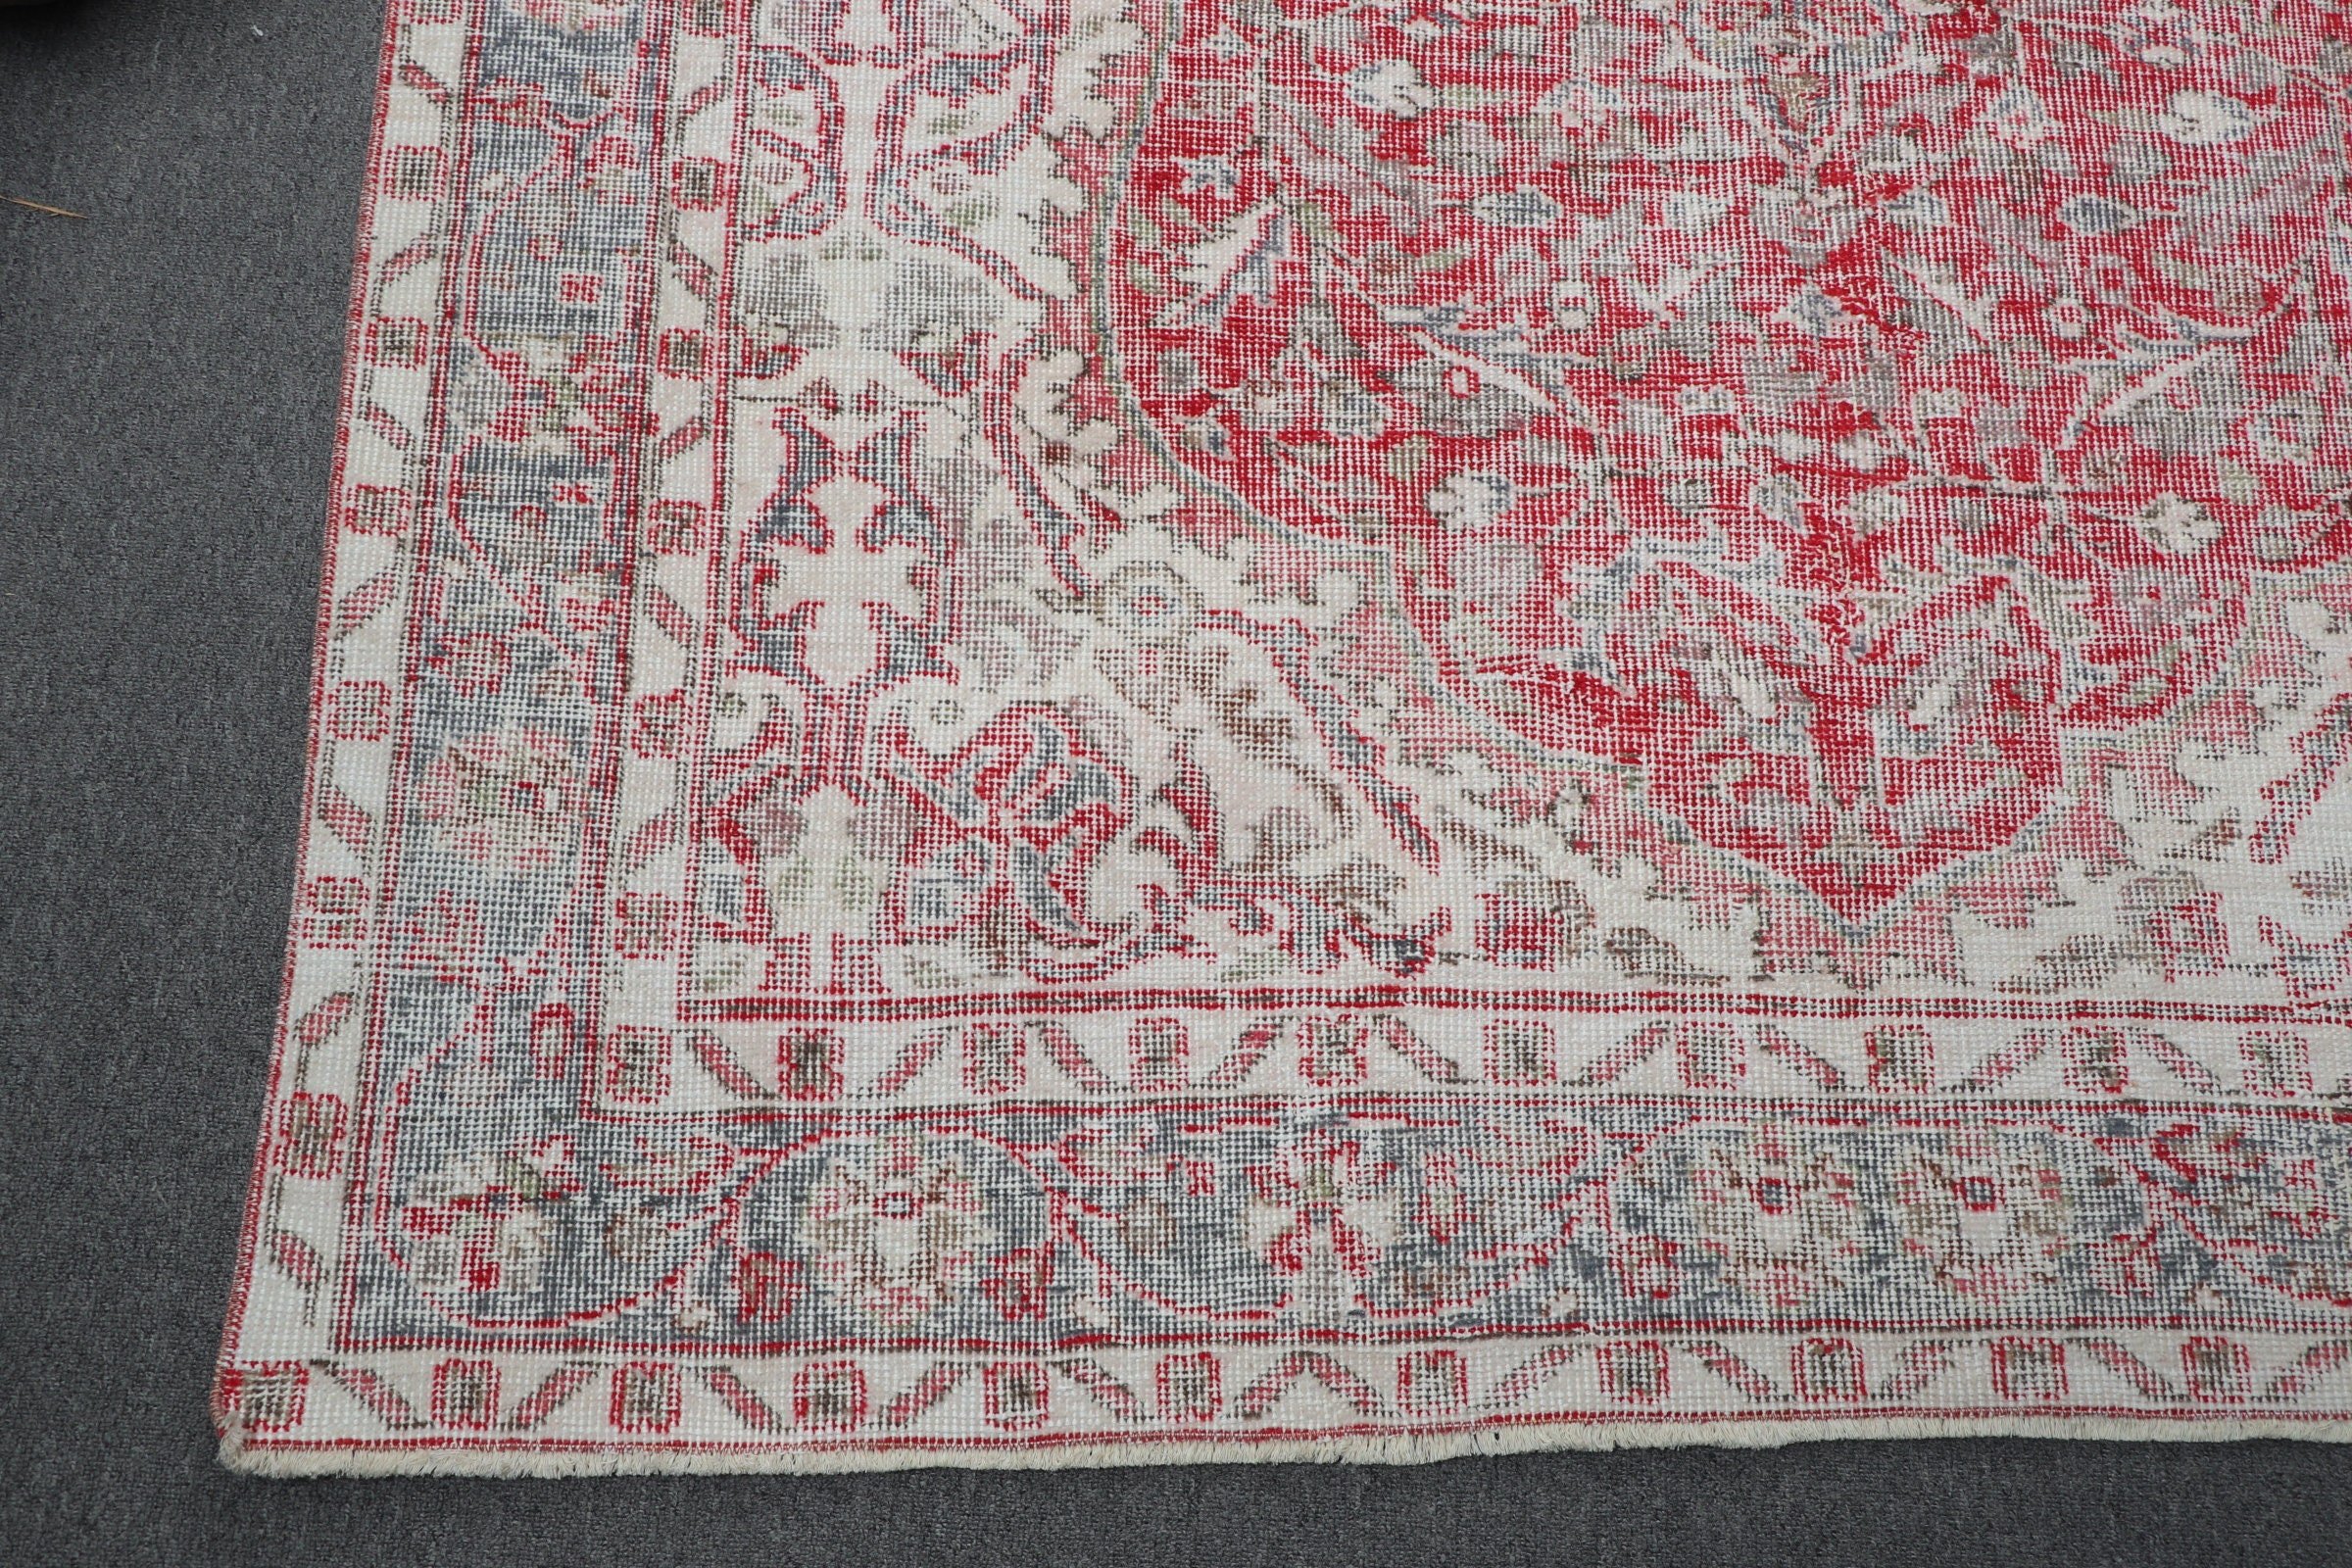 5.5x8.3 ft Large Rugs, Dining Room Rugs, Red Kitchen Rug, Turkish Rugs, Moroccan Rugs, Vintage Rugs, Antique Rugs, Bedroom Rug, Bright Rug